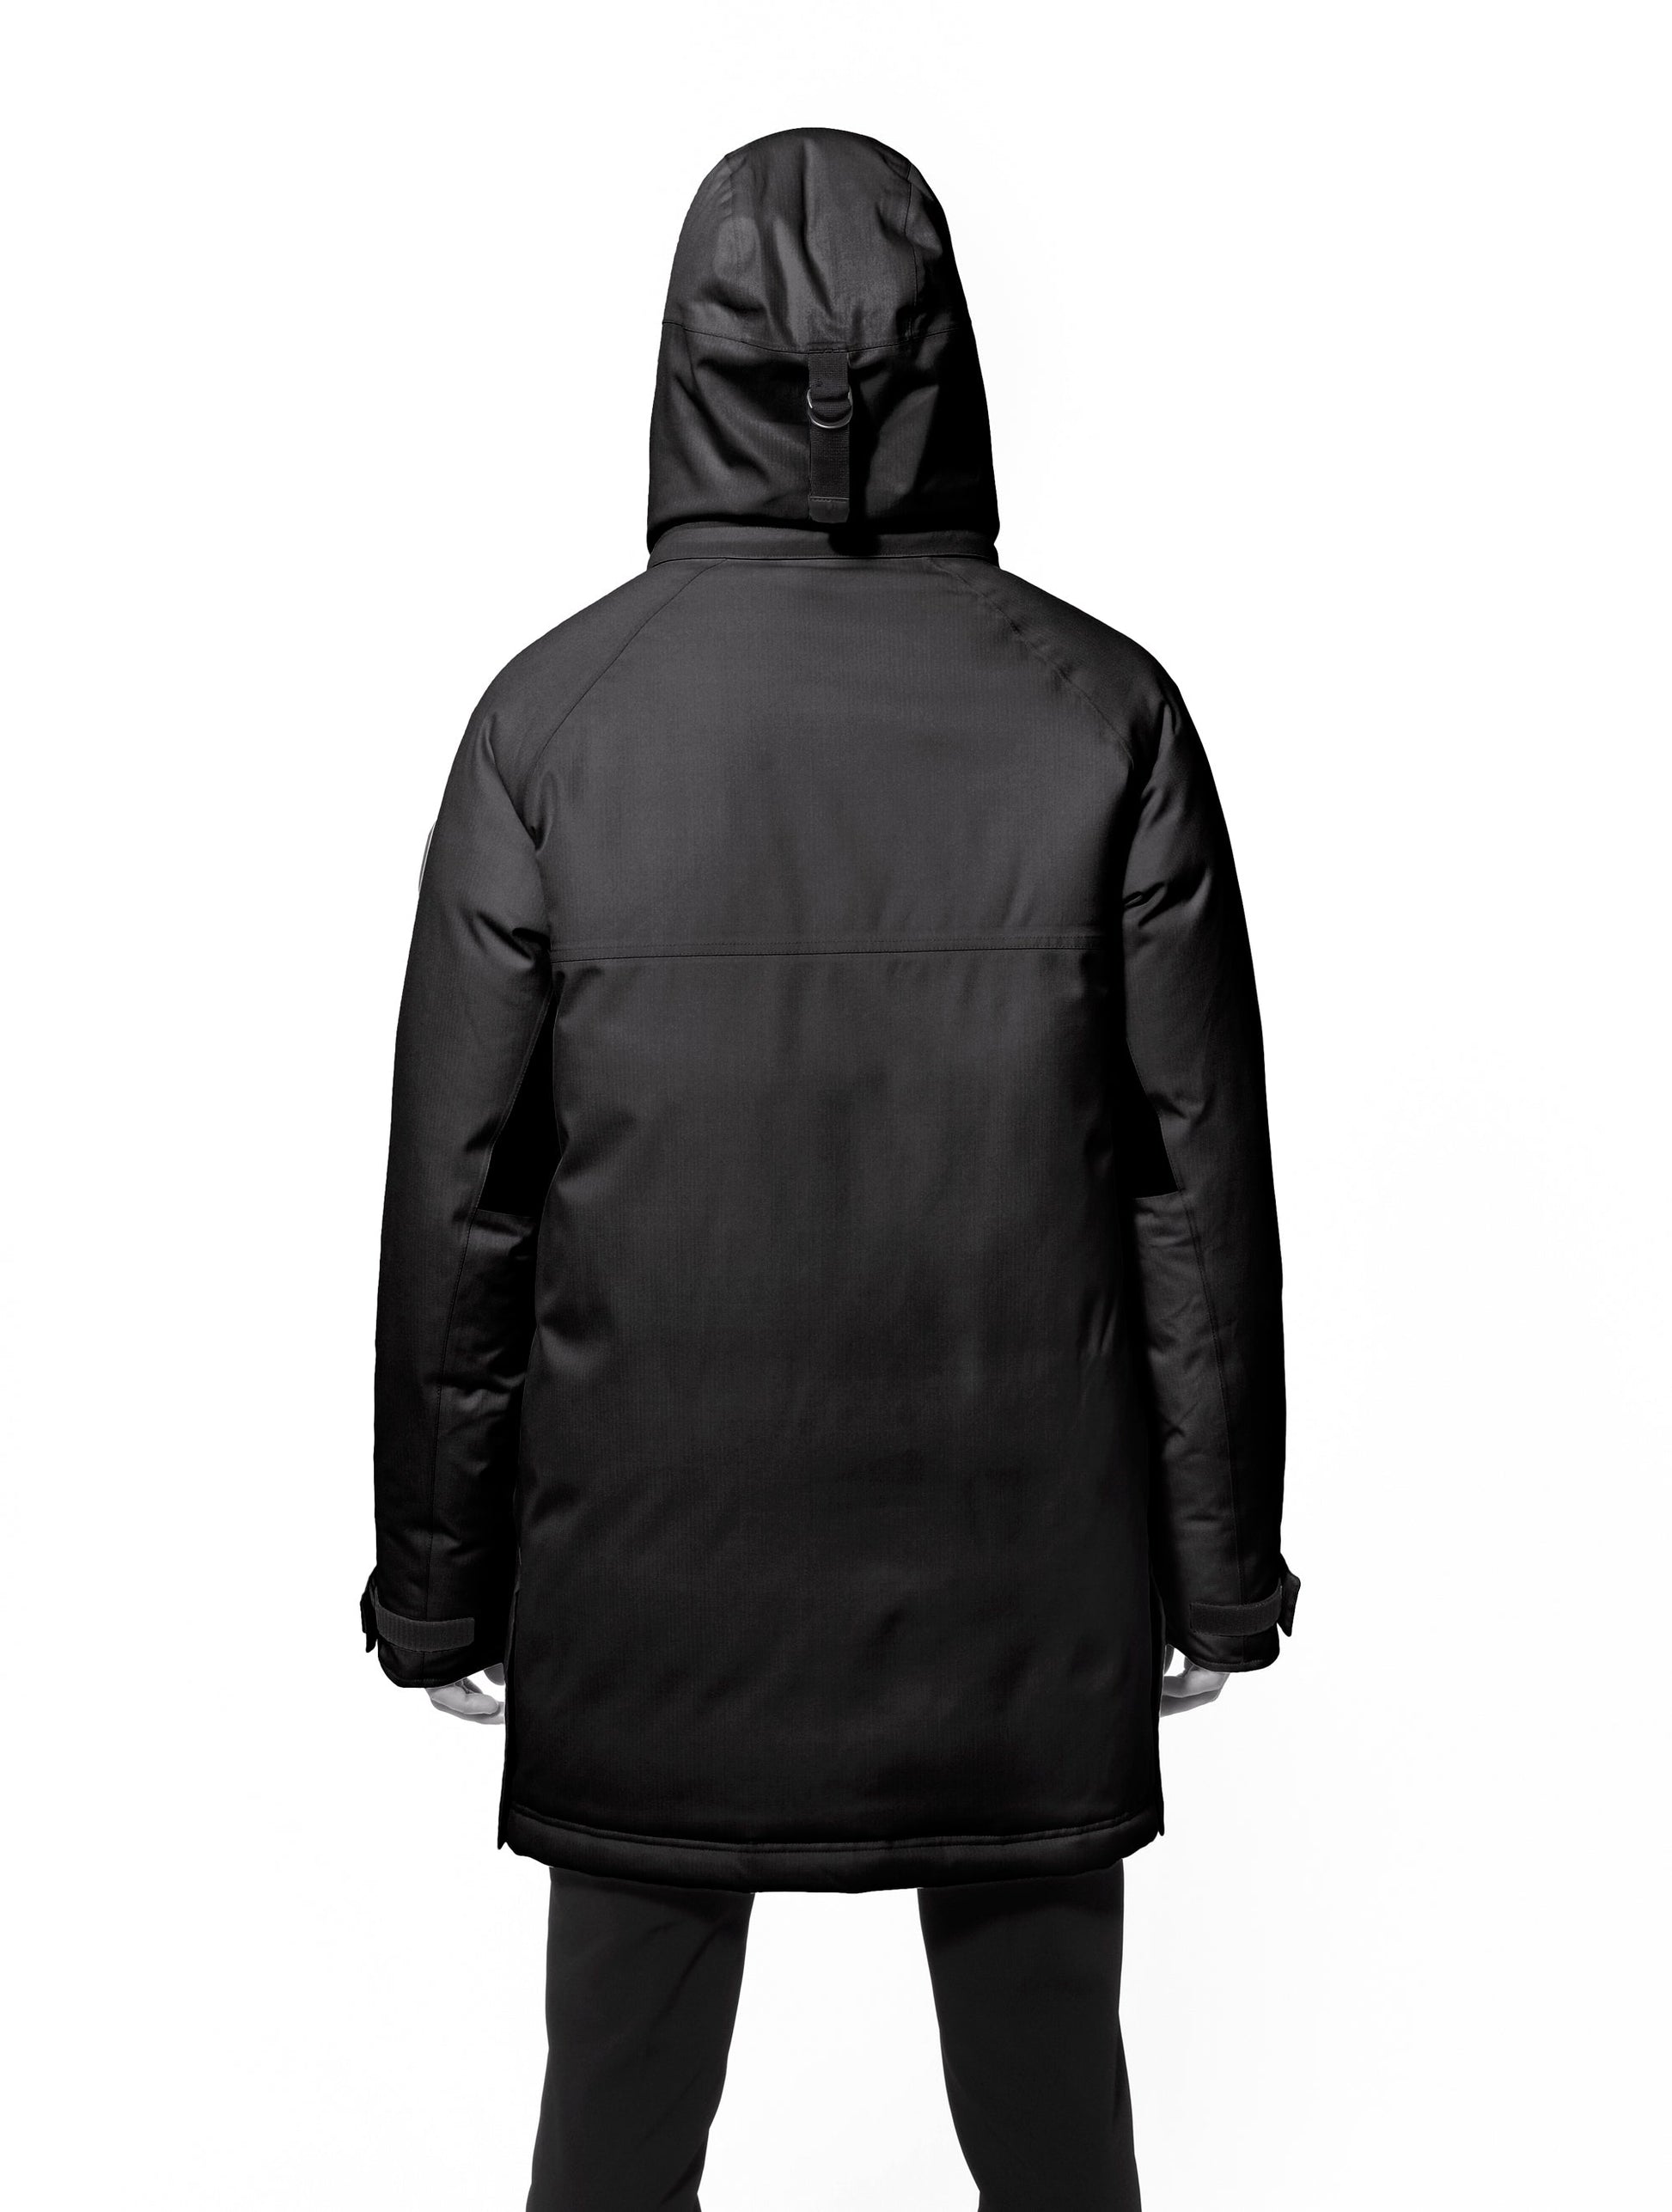 Men's thigh length down-filled parka with removable hood and removable coyote fur trim in Black